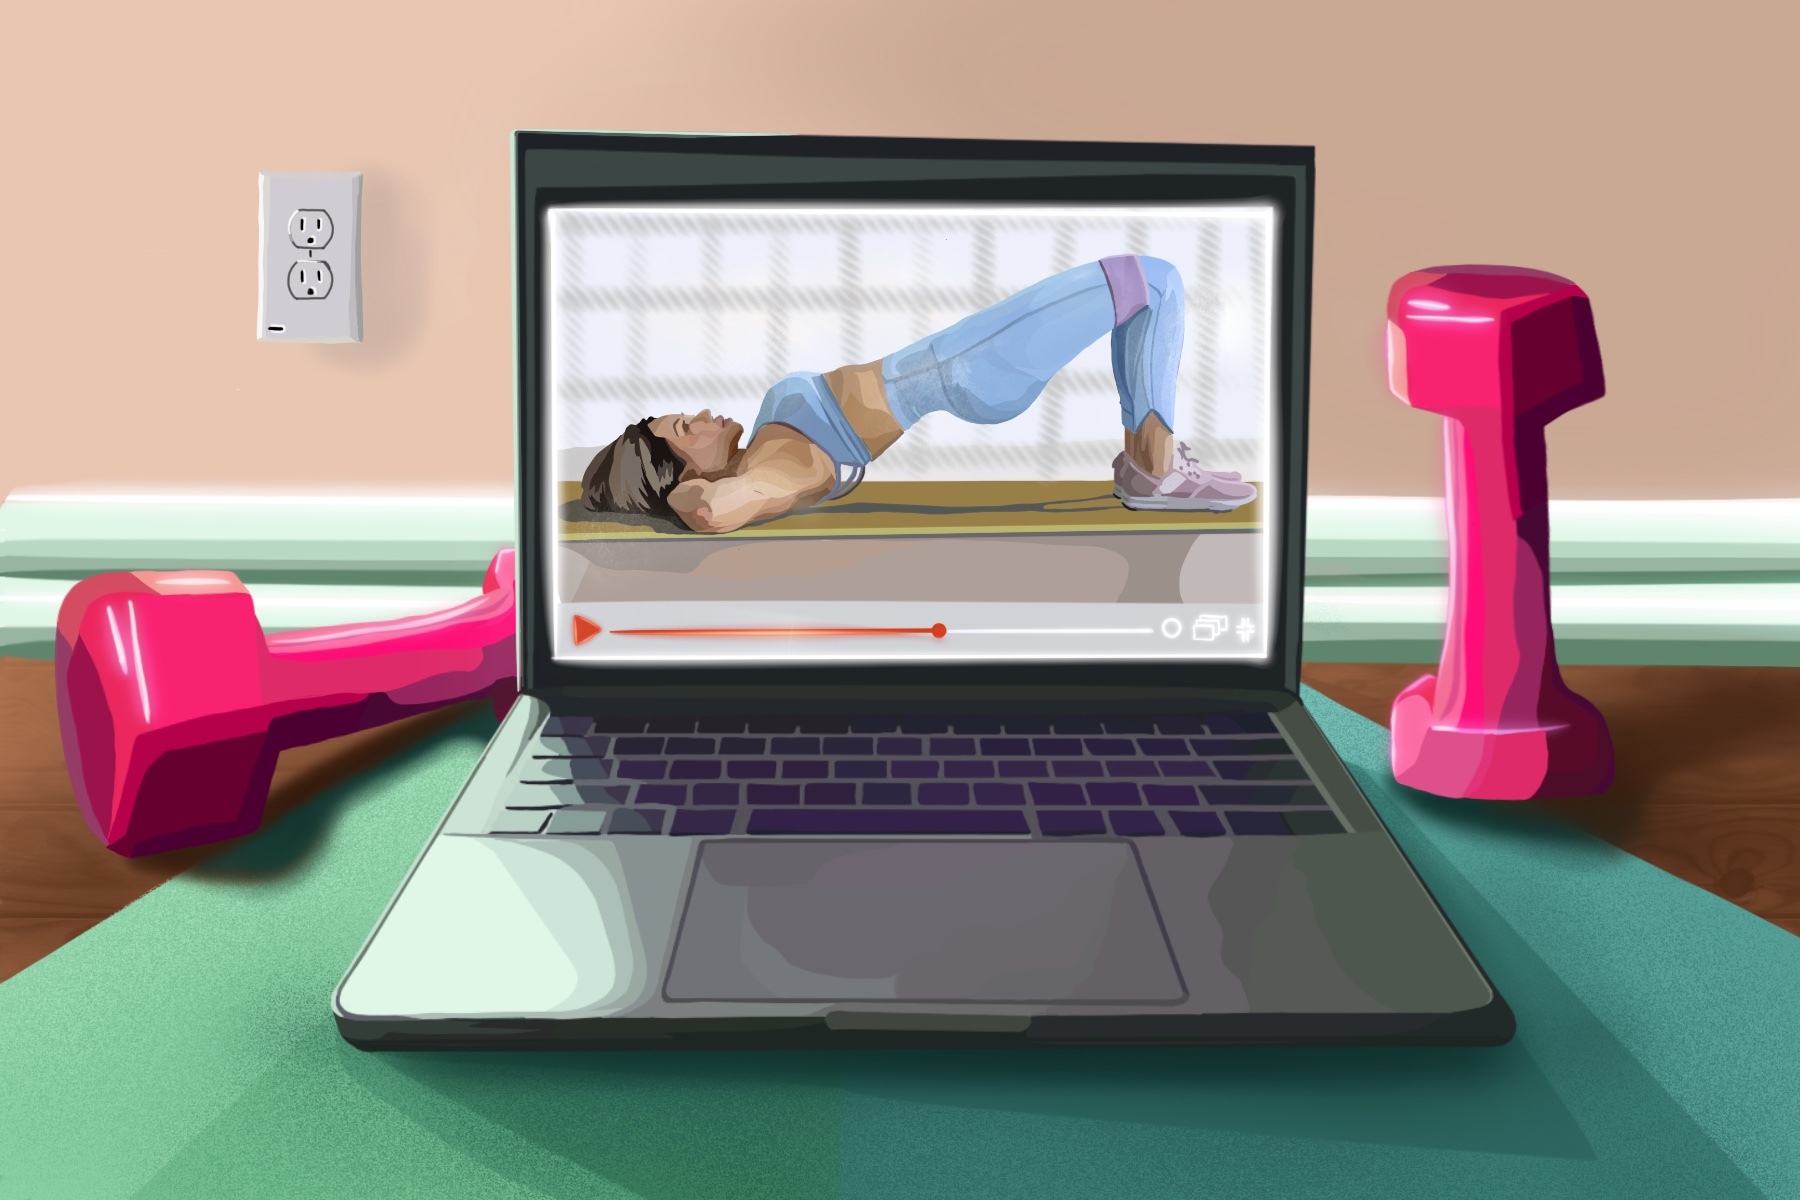 Chloe Ting provides viewers with free, at-home workouts.